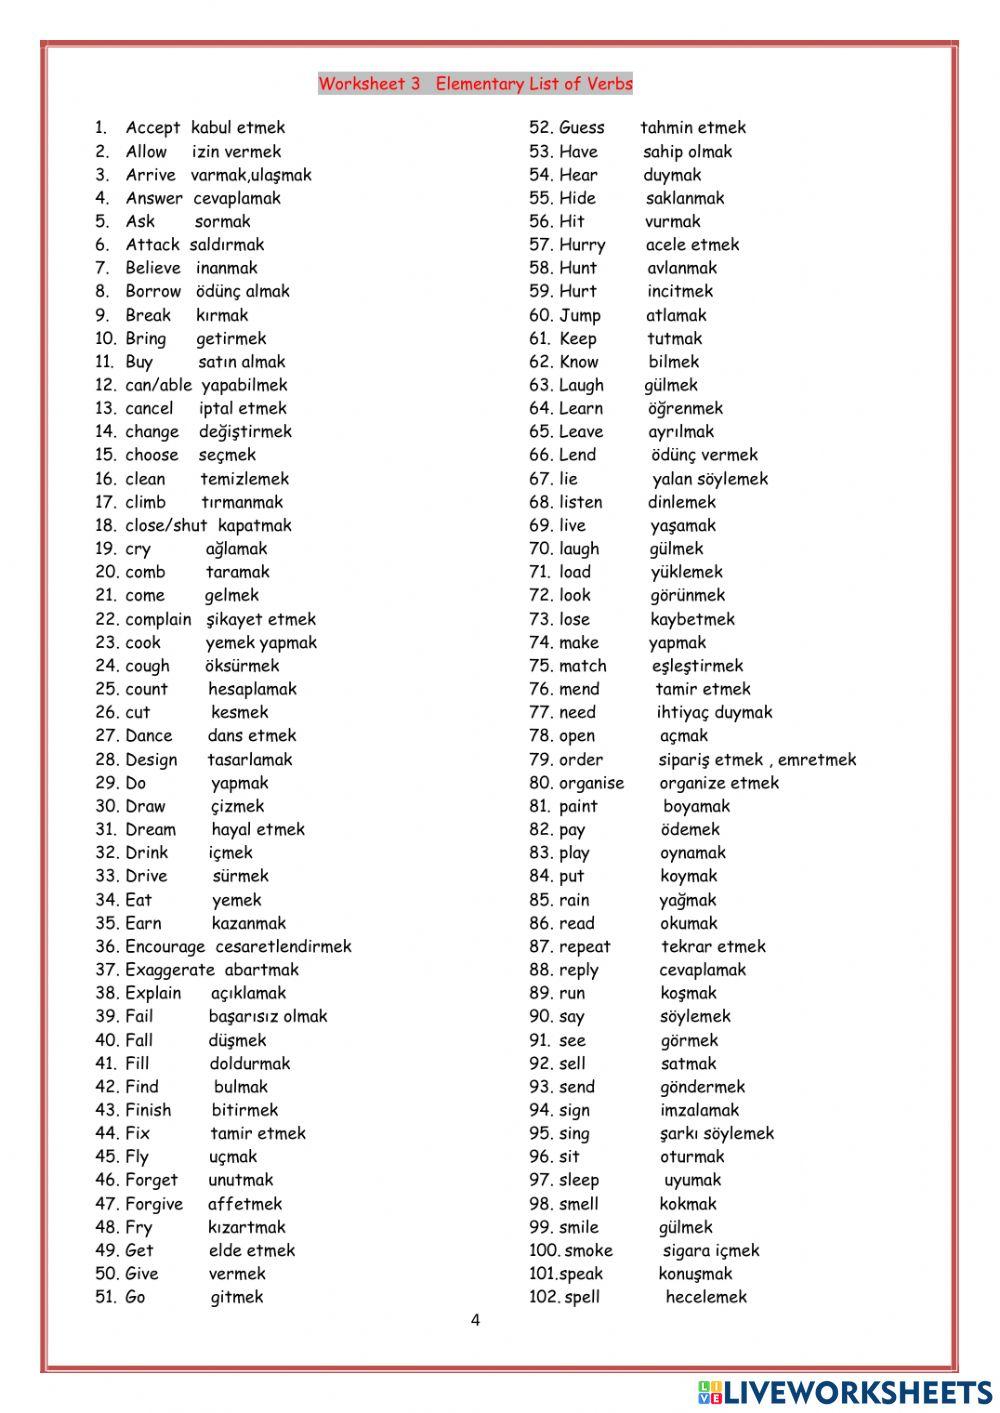 Most Common Verbs